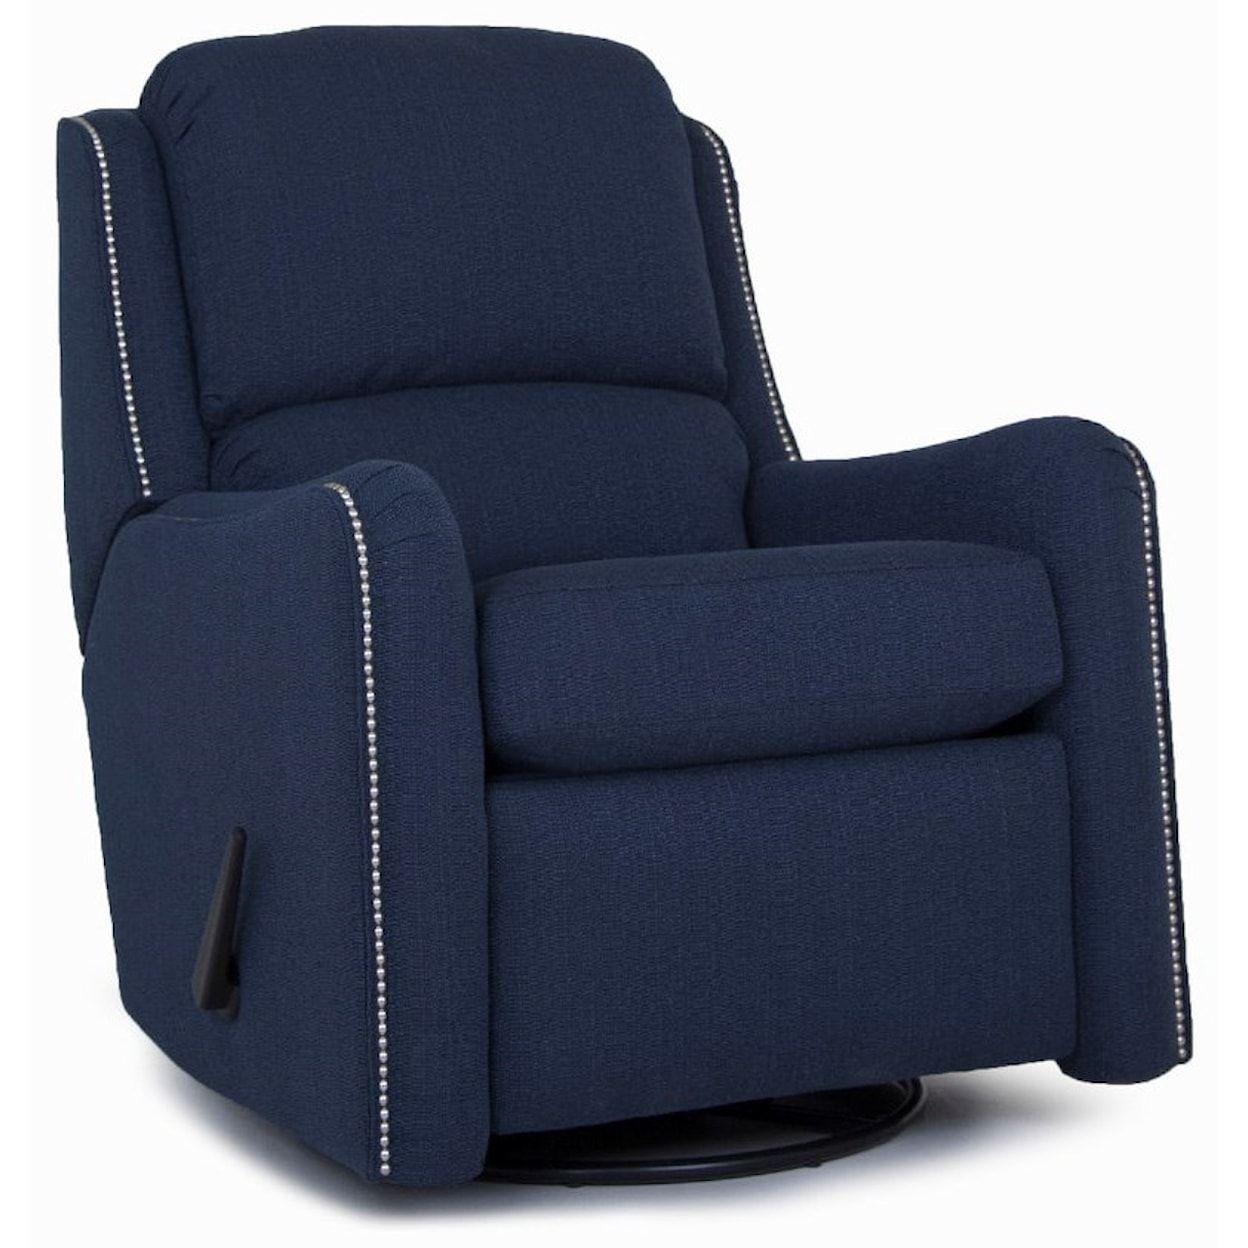 Smith Brothers 746 Recliner